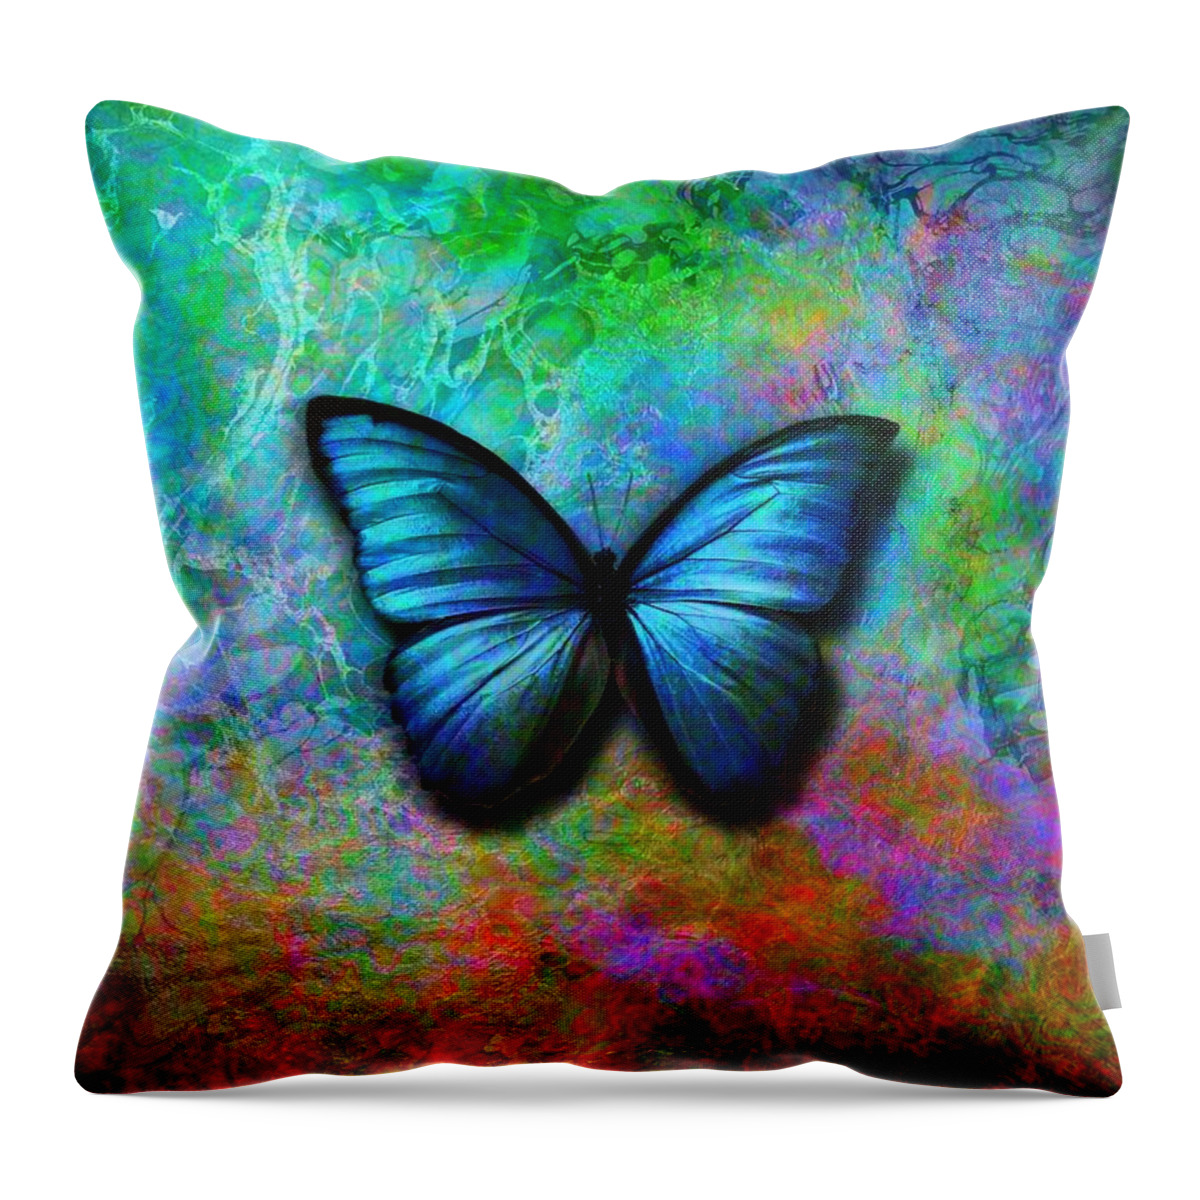 Blue Butterfly Throw Pillow featuring the digital art Blue Butterfly on colorful background by Lilia D